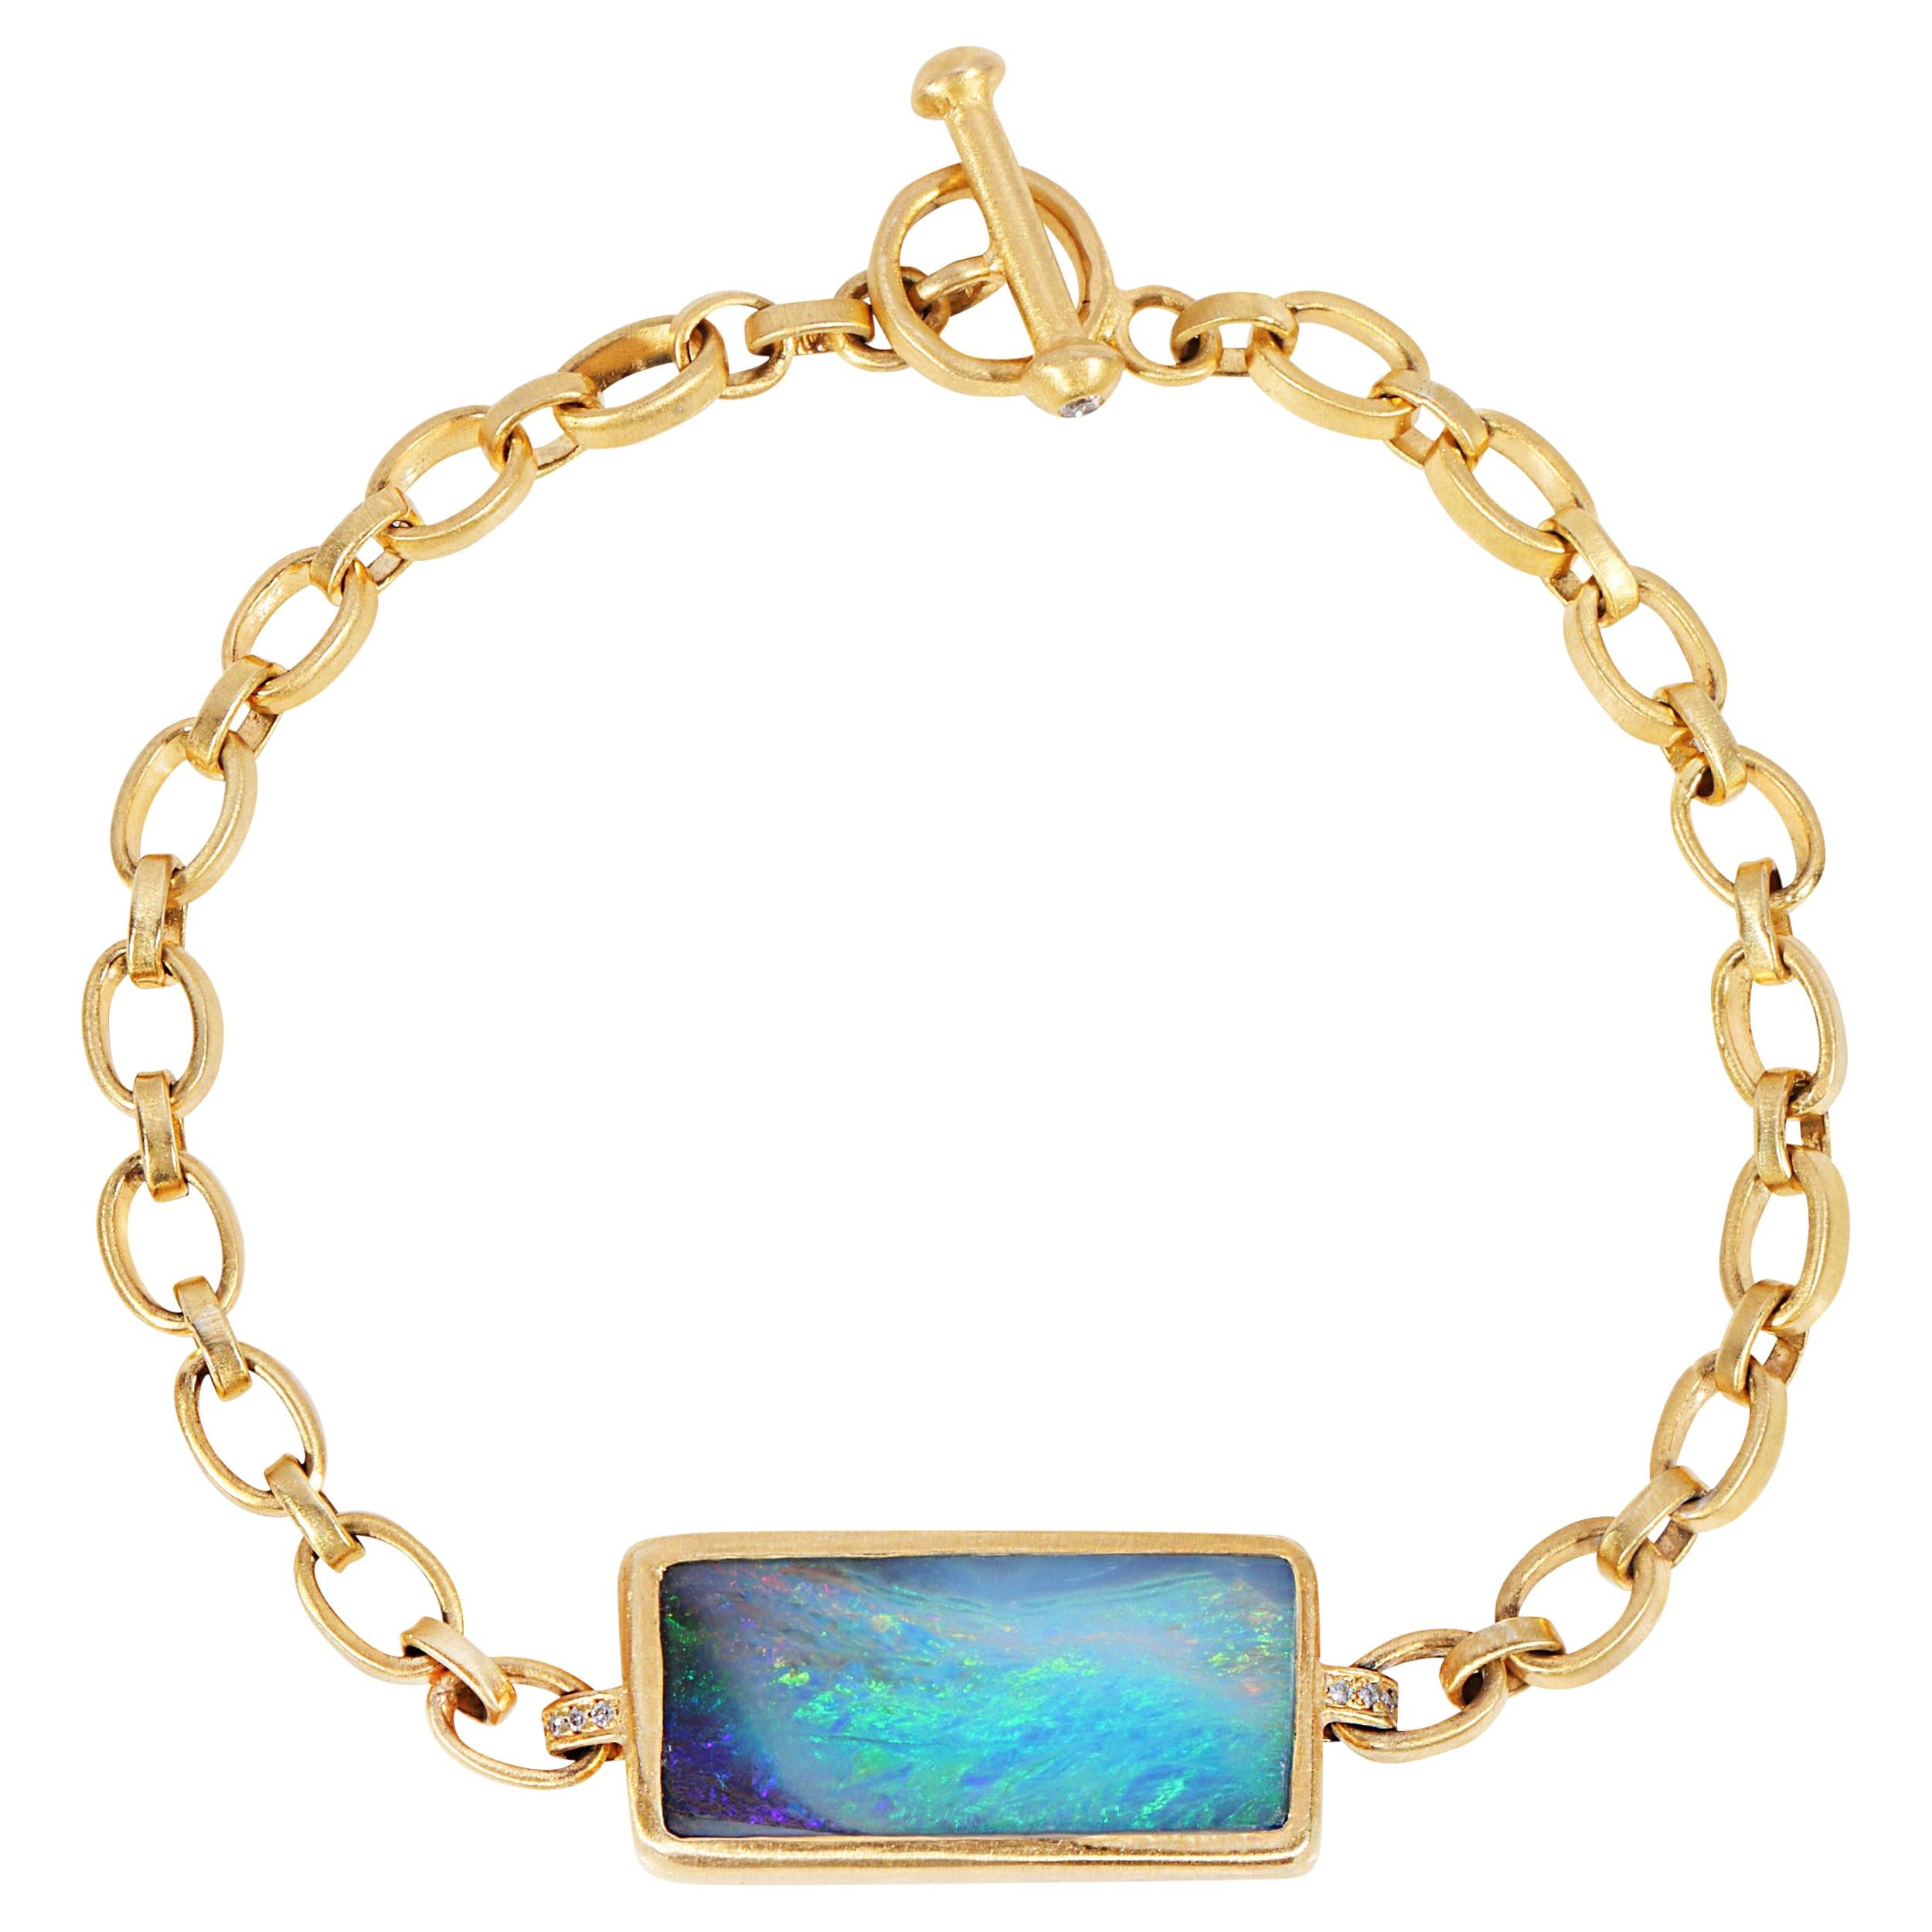 Australian Opal Handmade 18k Yellow Gold Chain Link Bracelet with Toggle Clasp